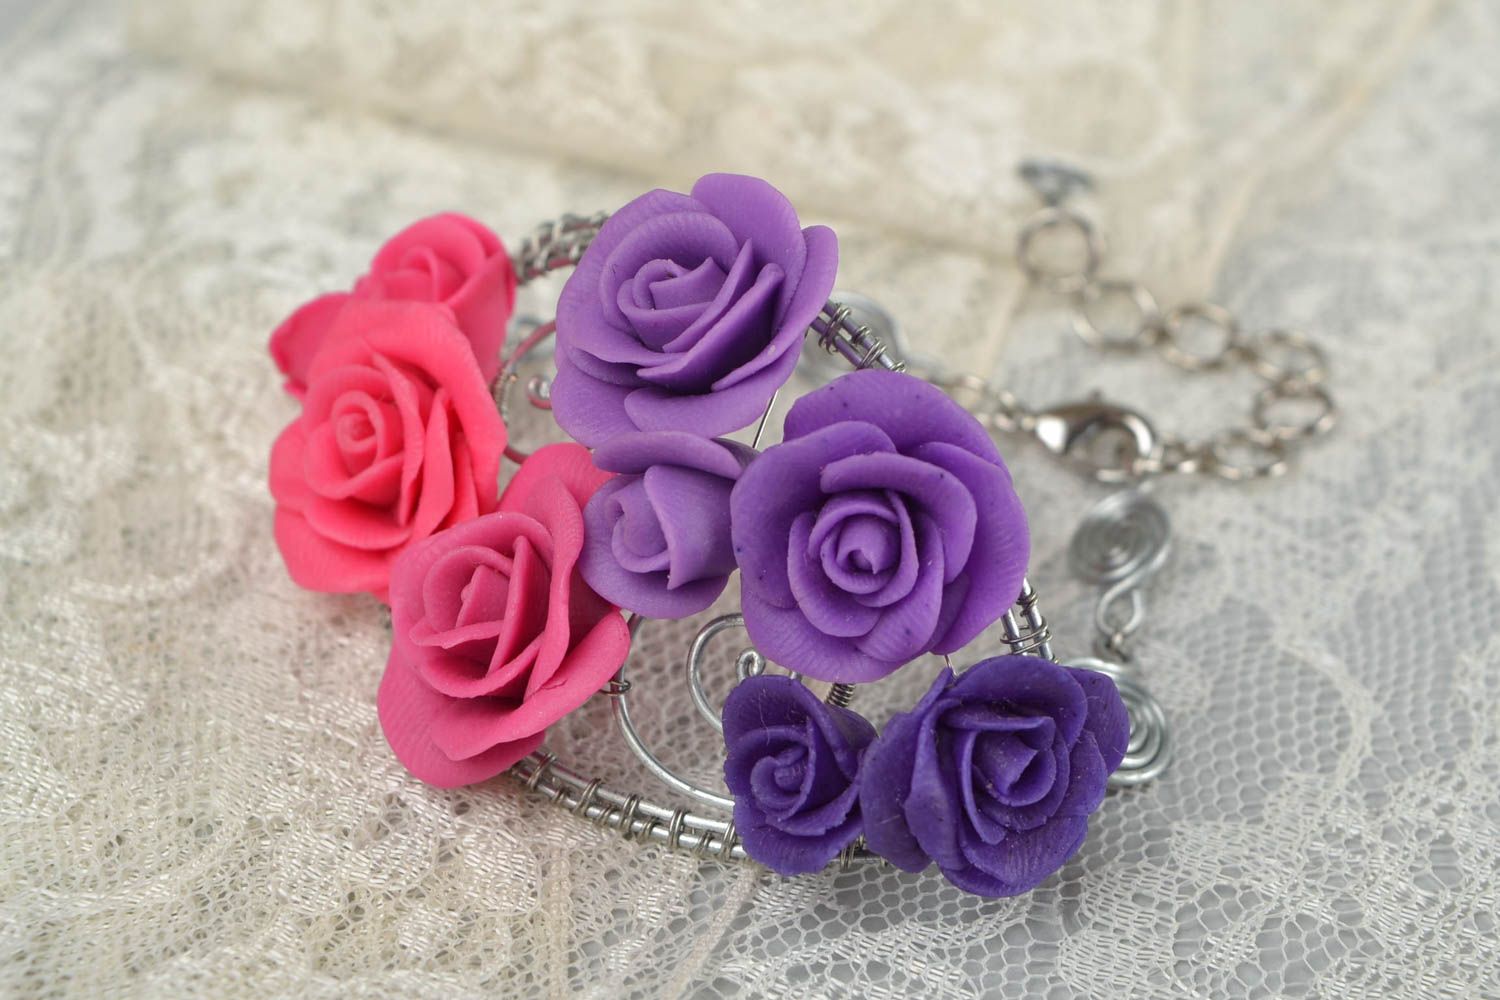 BUY Violet and pink roses cuff bracelet with a metal string base ...